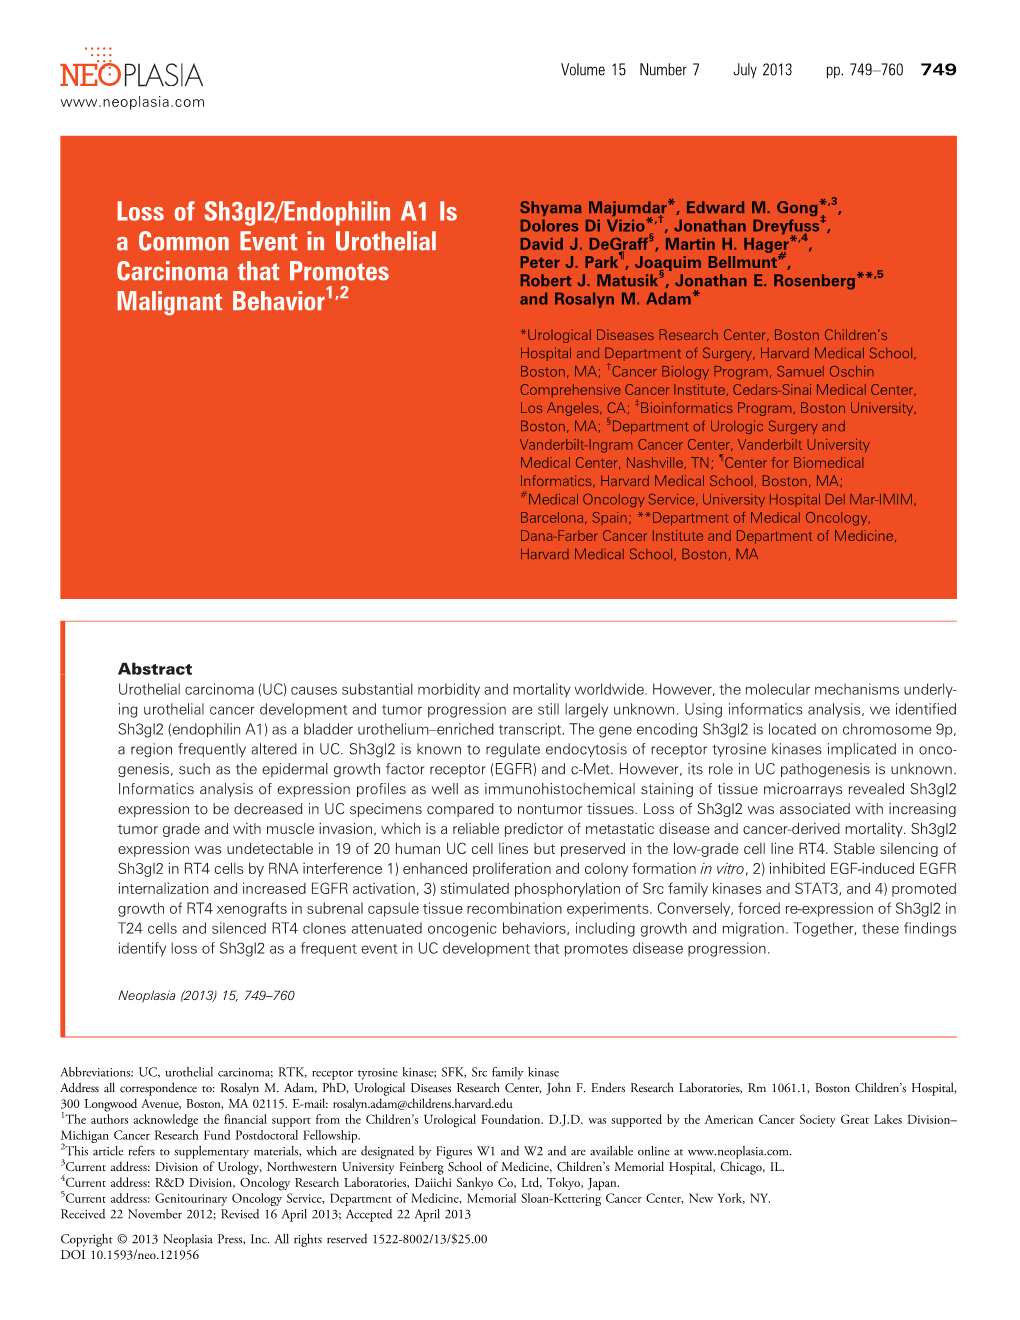 Loss of Sh3gl2/Endophilin A1 Is a Common Event in Urothelial